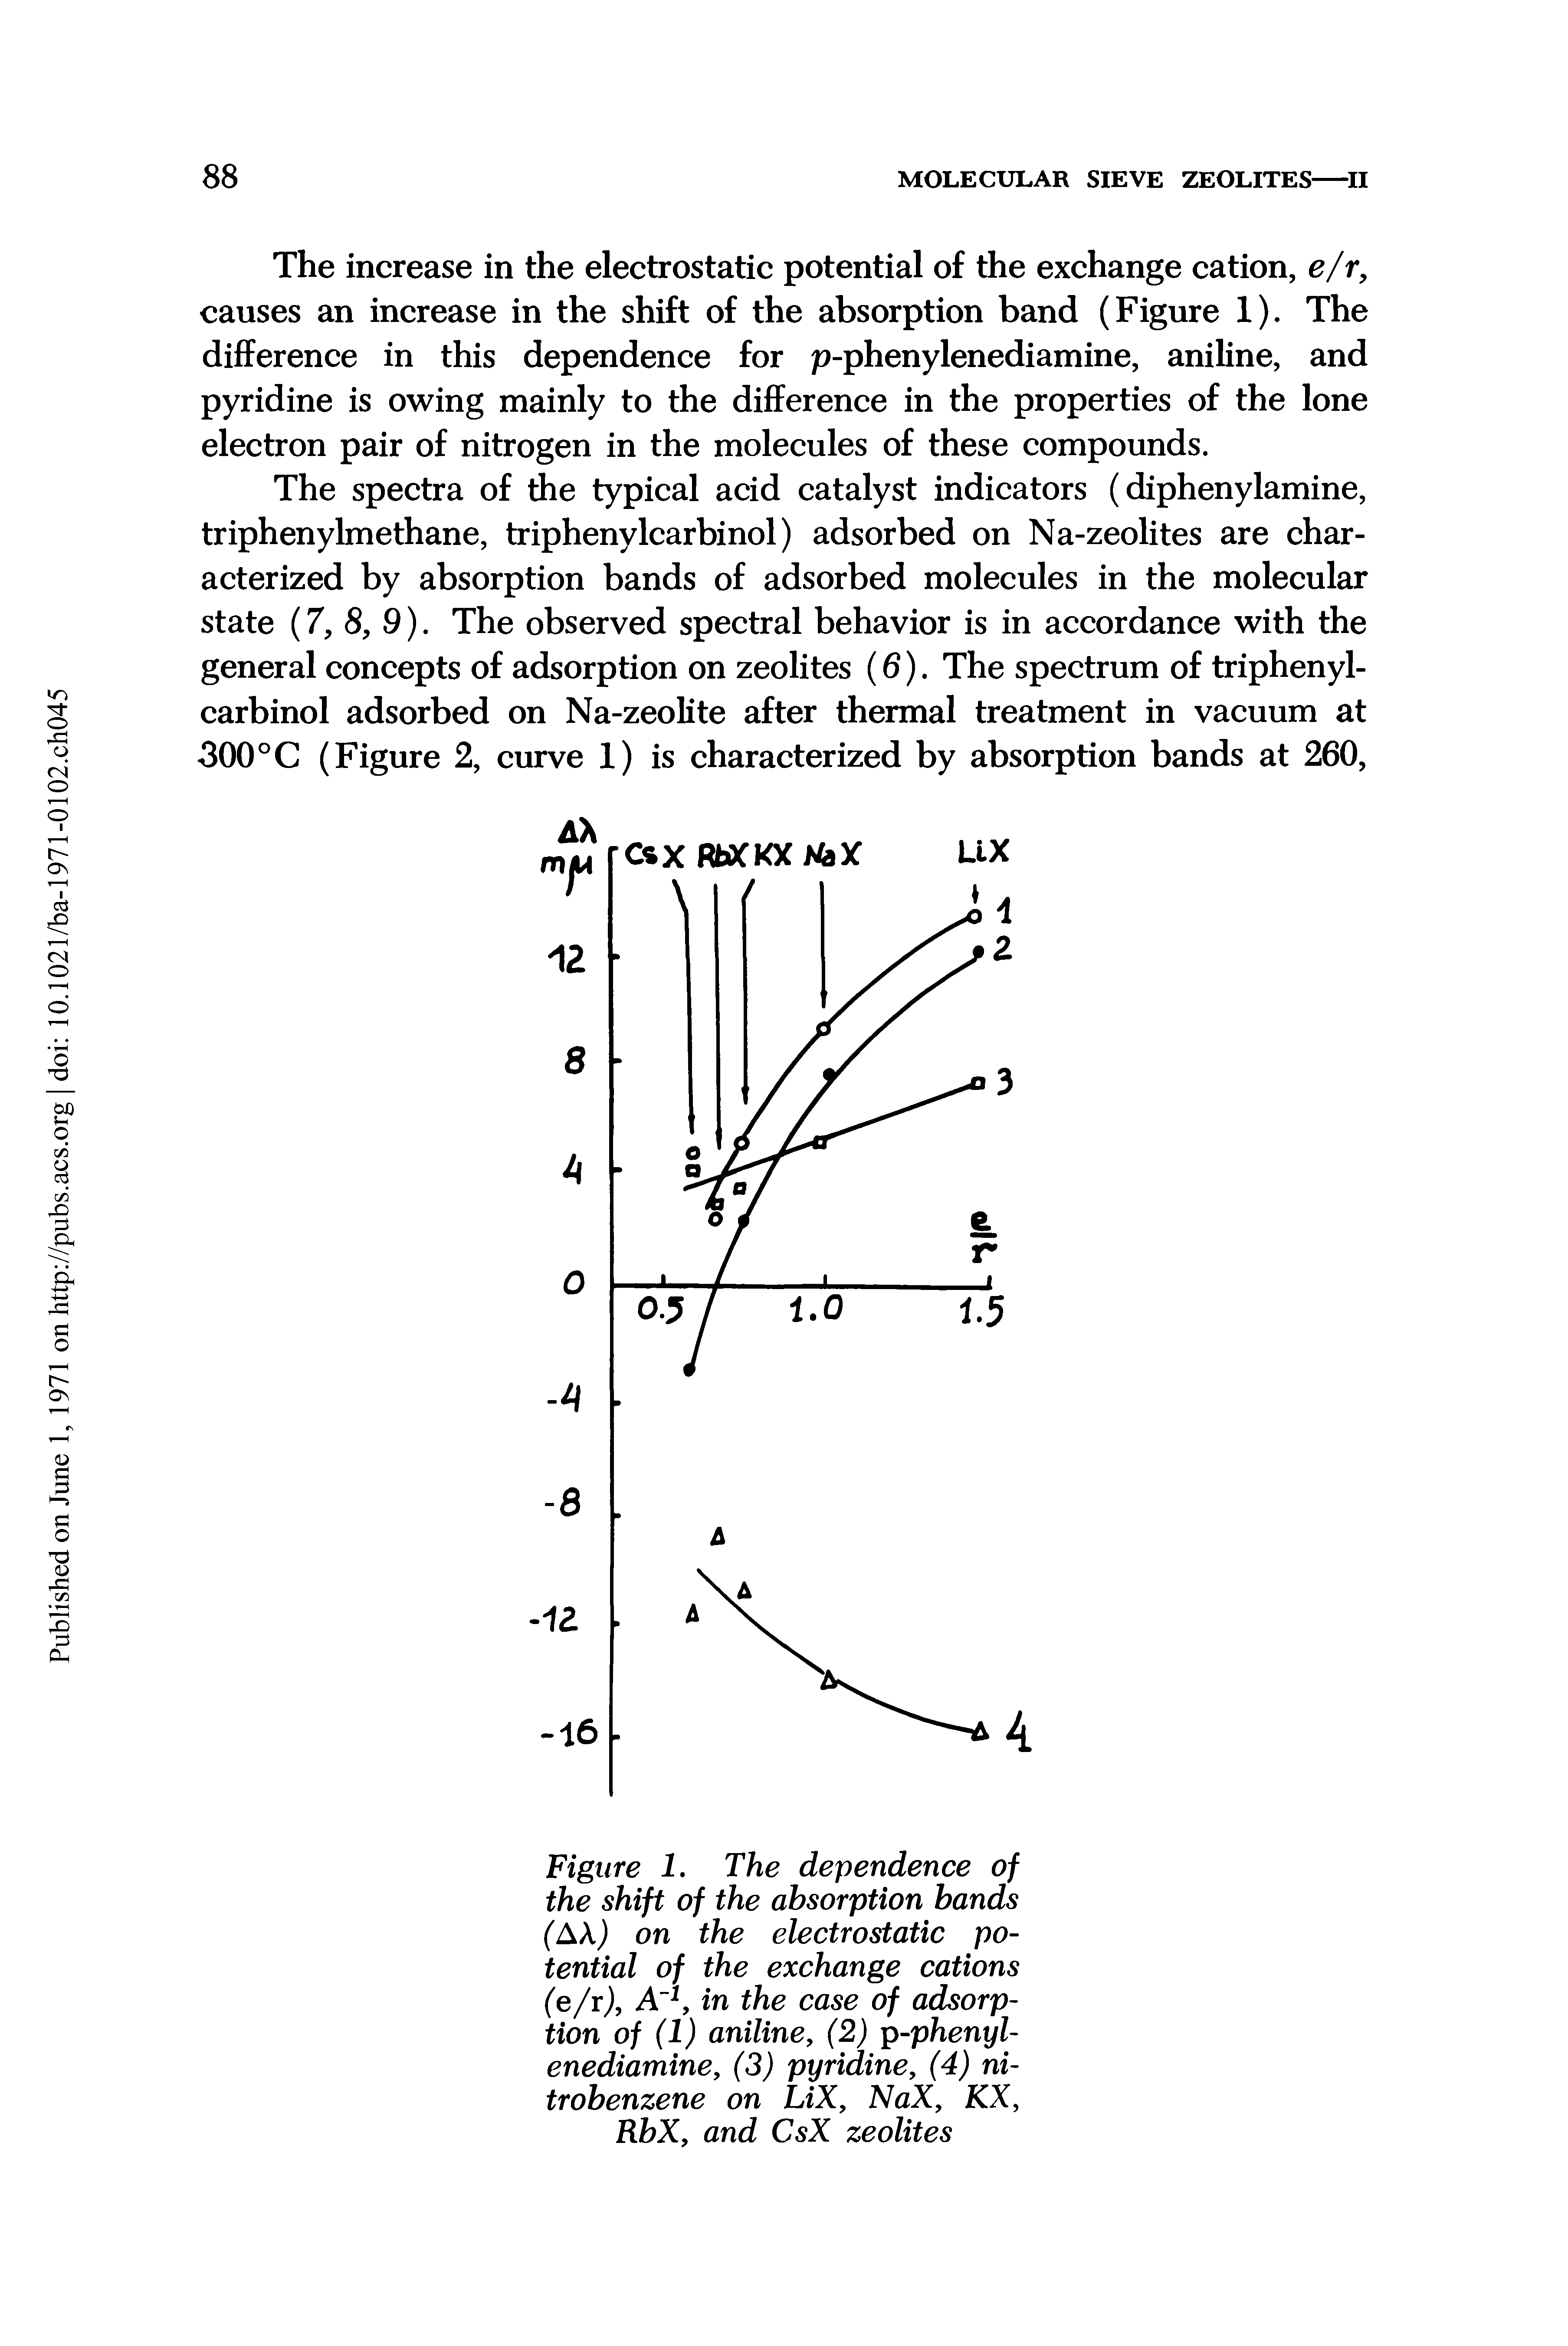 Figure 1. The dependence of the shift of the absorption bands (AX) on the electrostatic potential of the exchange cations (e/r), A, in the case of adsorption of (1) aniline, (2) p-phenyl-enediamine, (3) pyridine, (4) nitrobenzene on LiX, NaX, KX, RbX, and CsX zeolites...